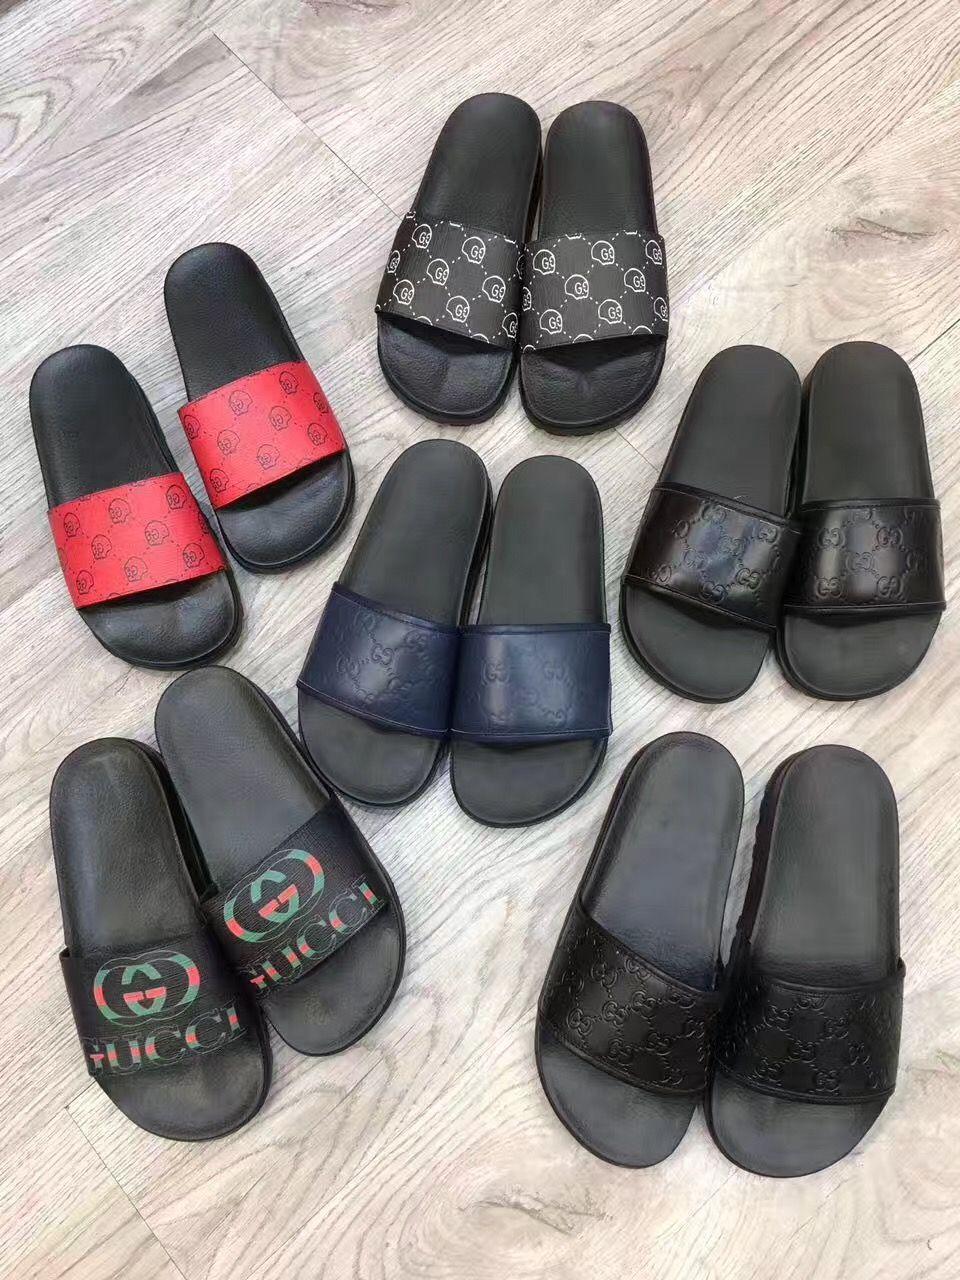 Gucci man shoes casual slippers slides. Shoes. Men